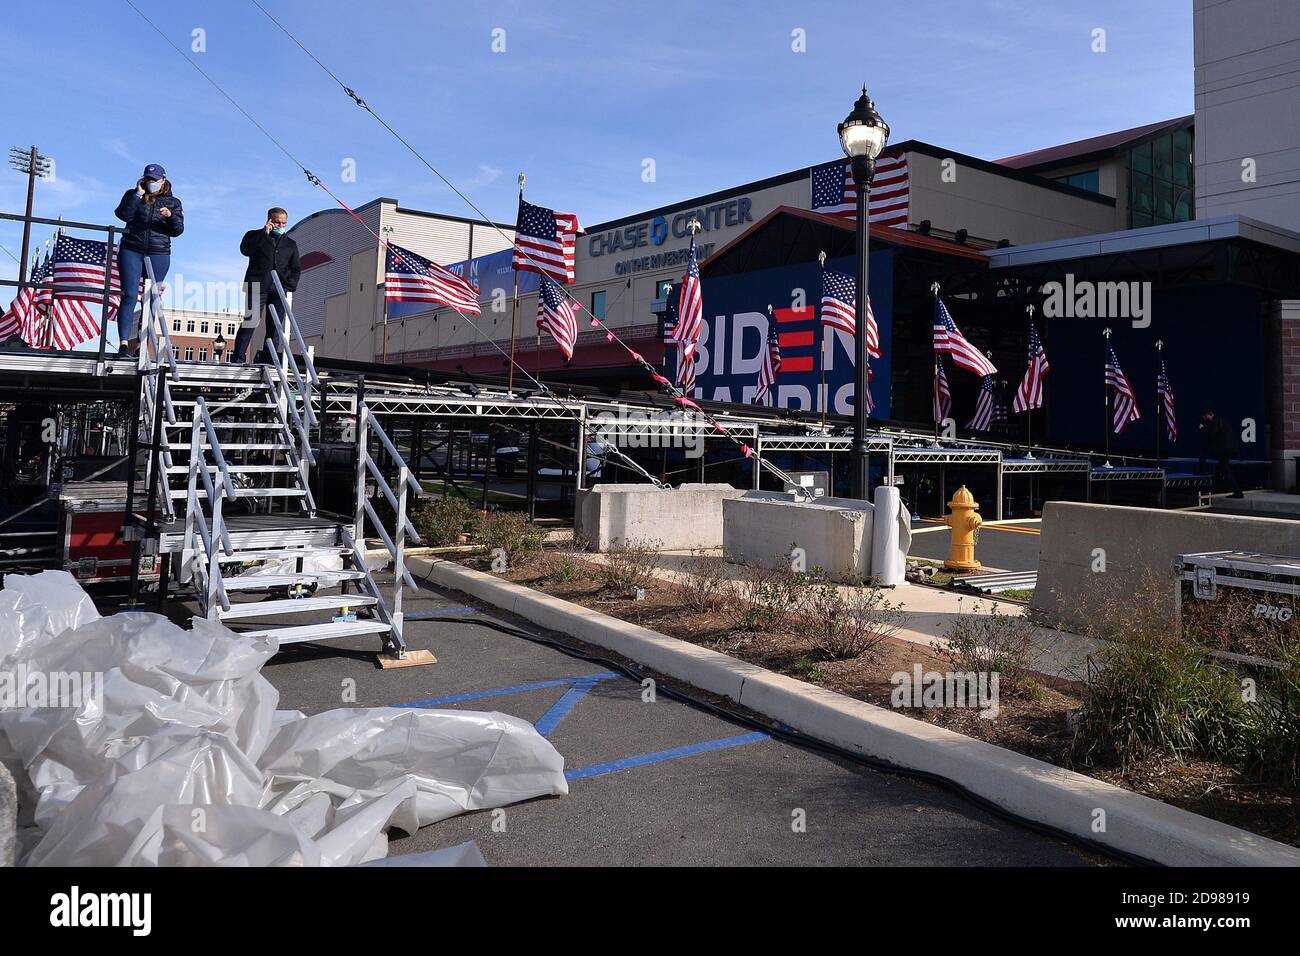 Wilmington, USA. 03rd Nov, 2020. A side view of the stage and background where Democratic Presidential candidate Joe Biden is expected to speak later on in the day, in Wilmington, DE, November 3, 2020. Today is voting day for the 2020 U.S. Presidential election that has a Democratic ticket of former Vice President Joe Biden and his Vice President nominee Kamala Harris and a Republican ticket of incumbent President Donald J. Trump and Vice President Mike Pence.(Anthony Behar/Sipa USA) Credit: Sipa USA/Alamy Live News Stock Photo